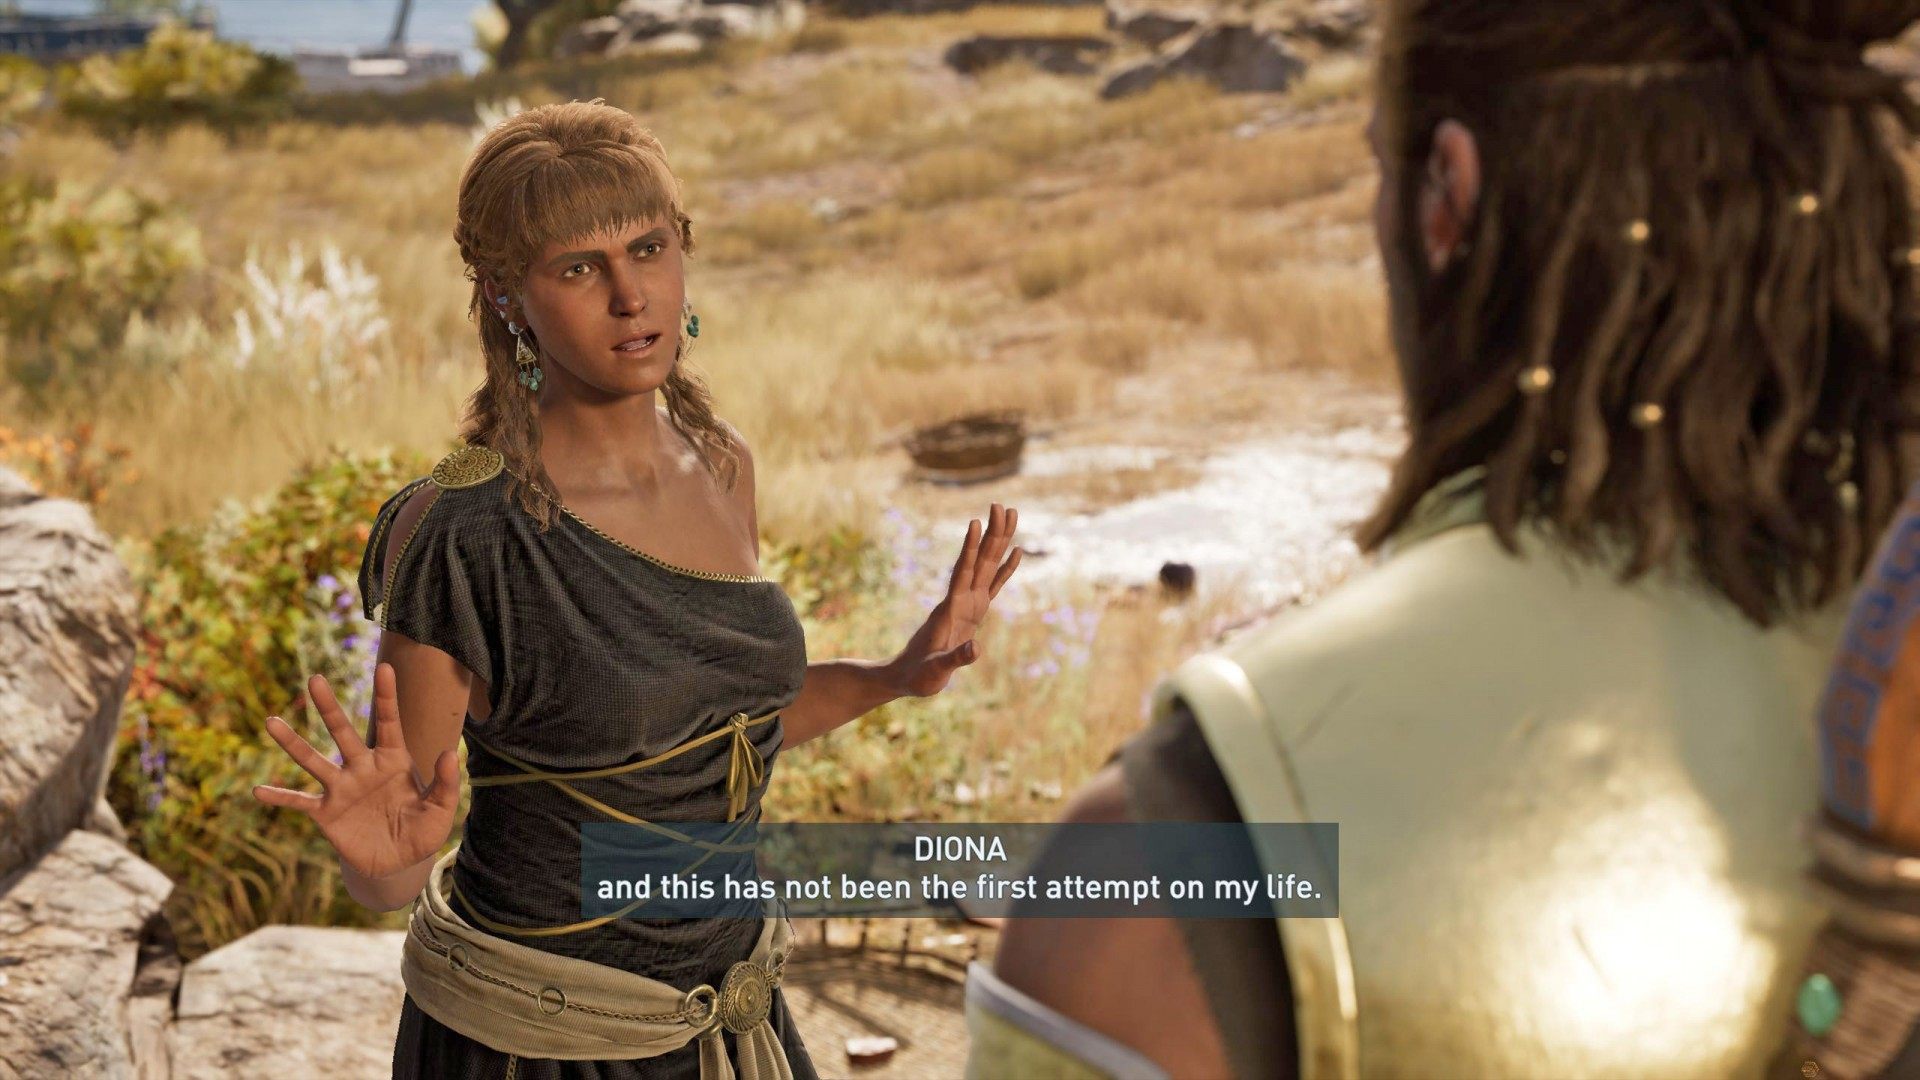 Diona Ac Odyssey Hot Related Keywords & Suggestions - Diona 